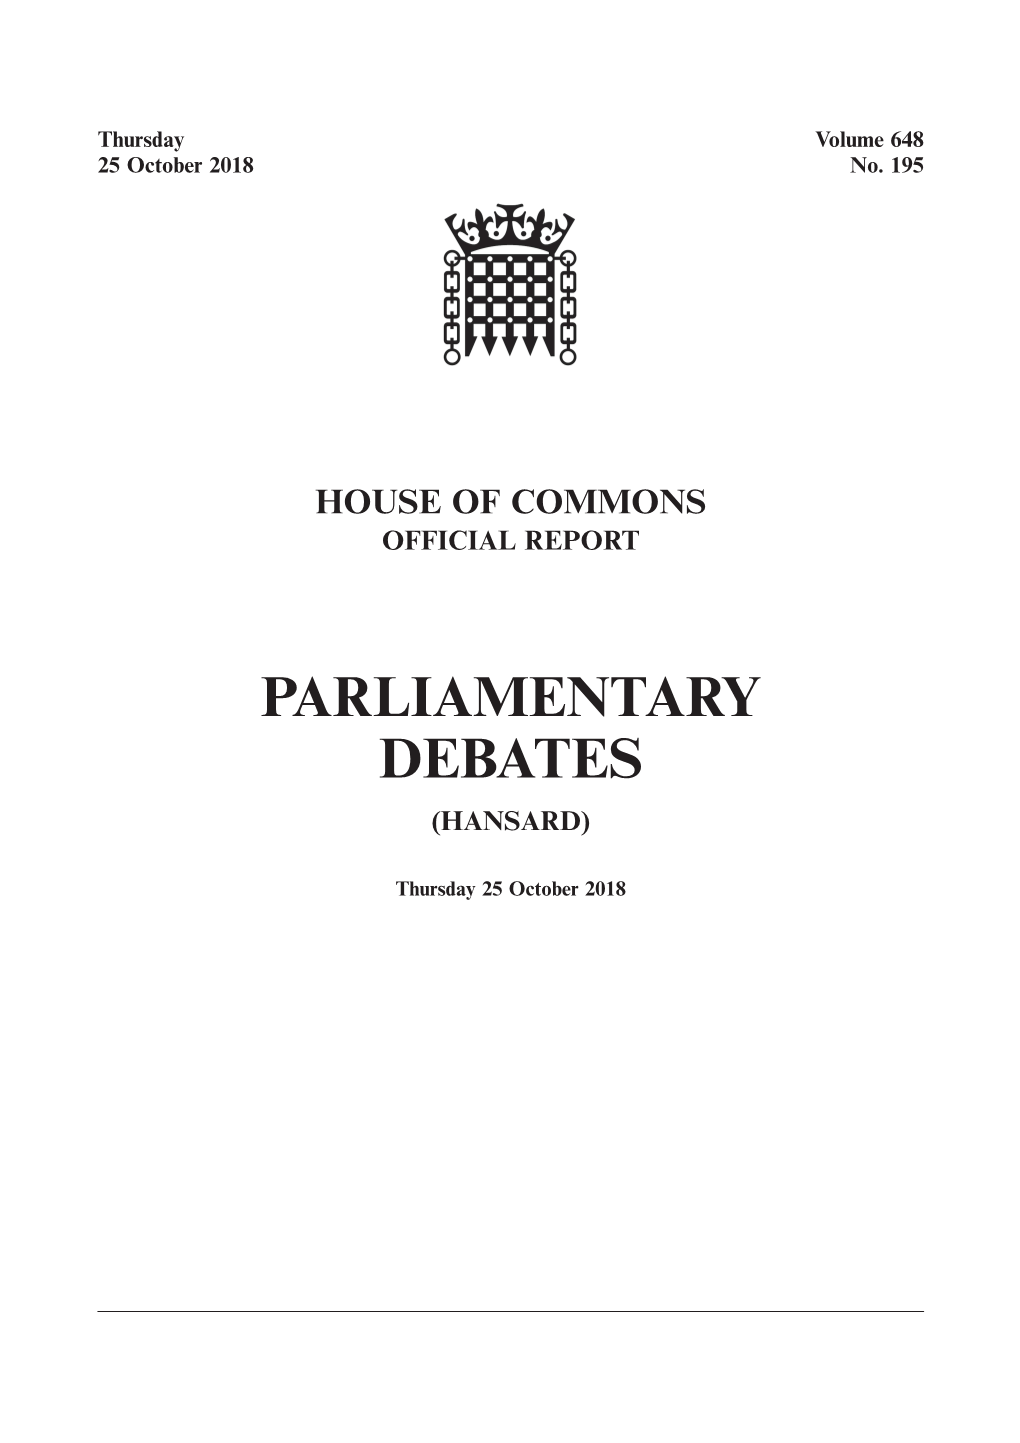 Whole Day Download the Hansard Record of the Entire Day in PDF